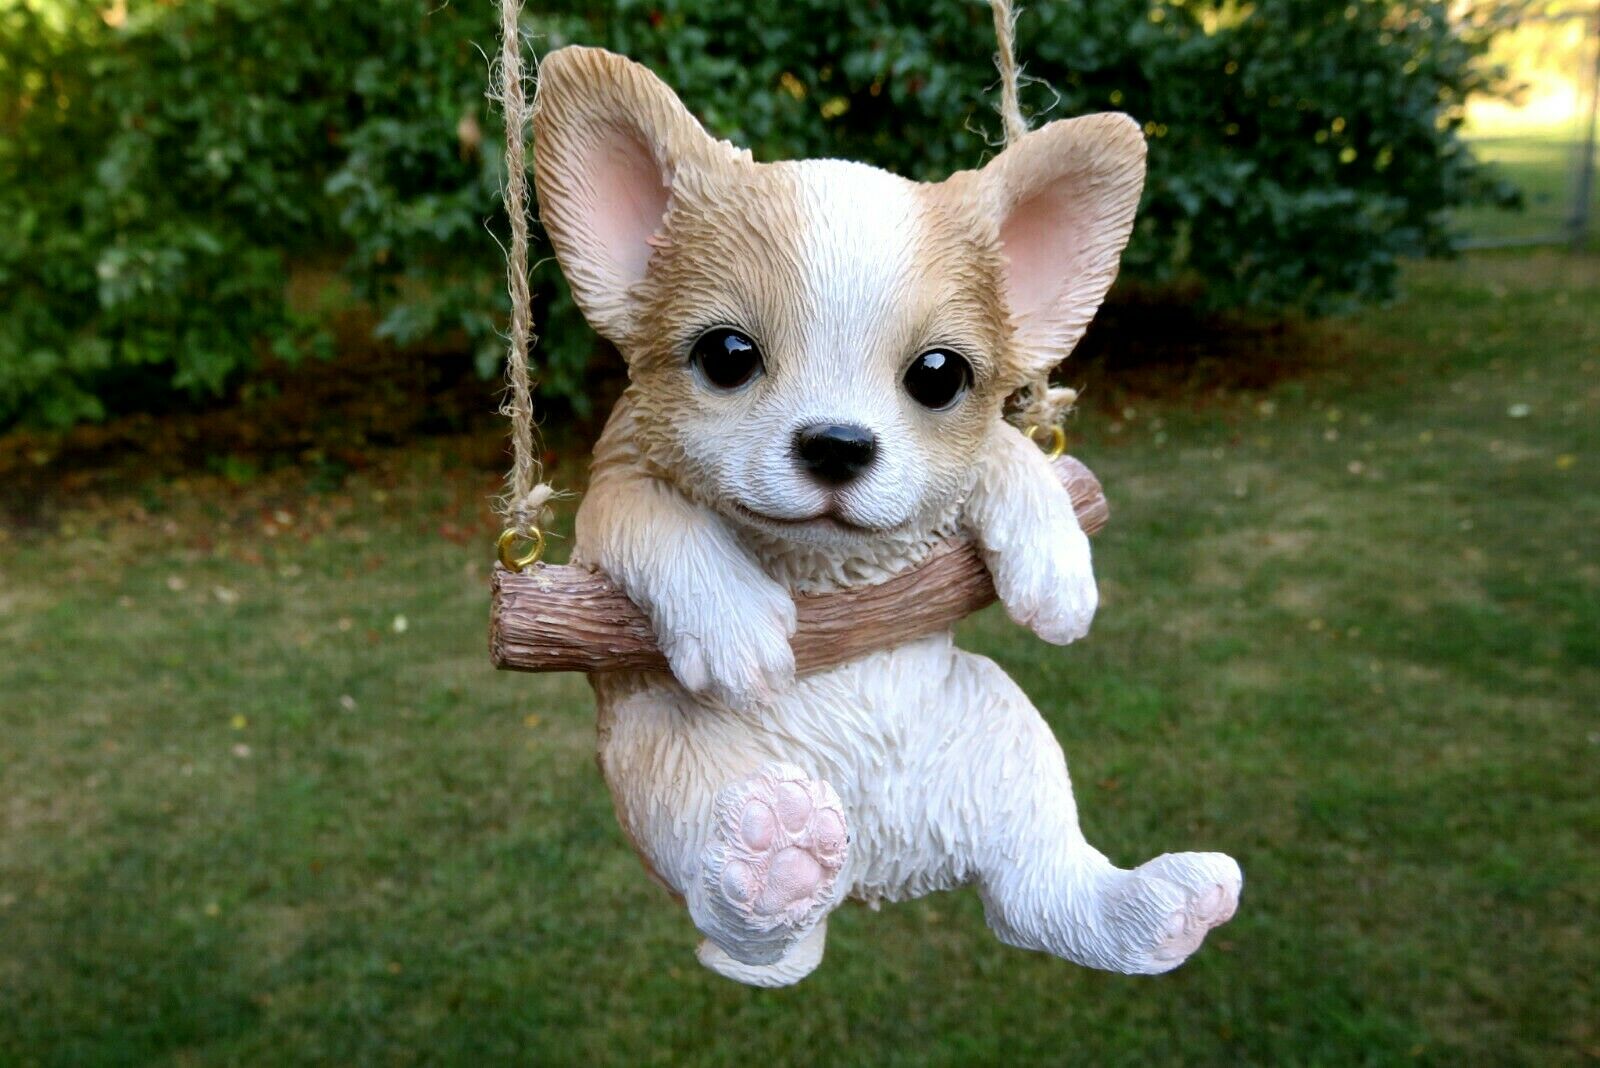 Chihuahua Puppy Dog Hanging Swing Figurine Tree Ornament Garden Resin 5"